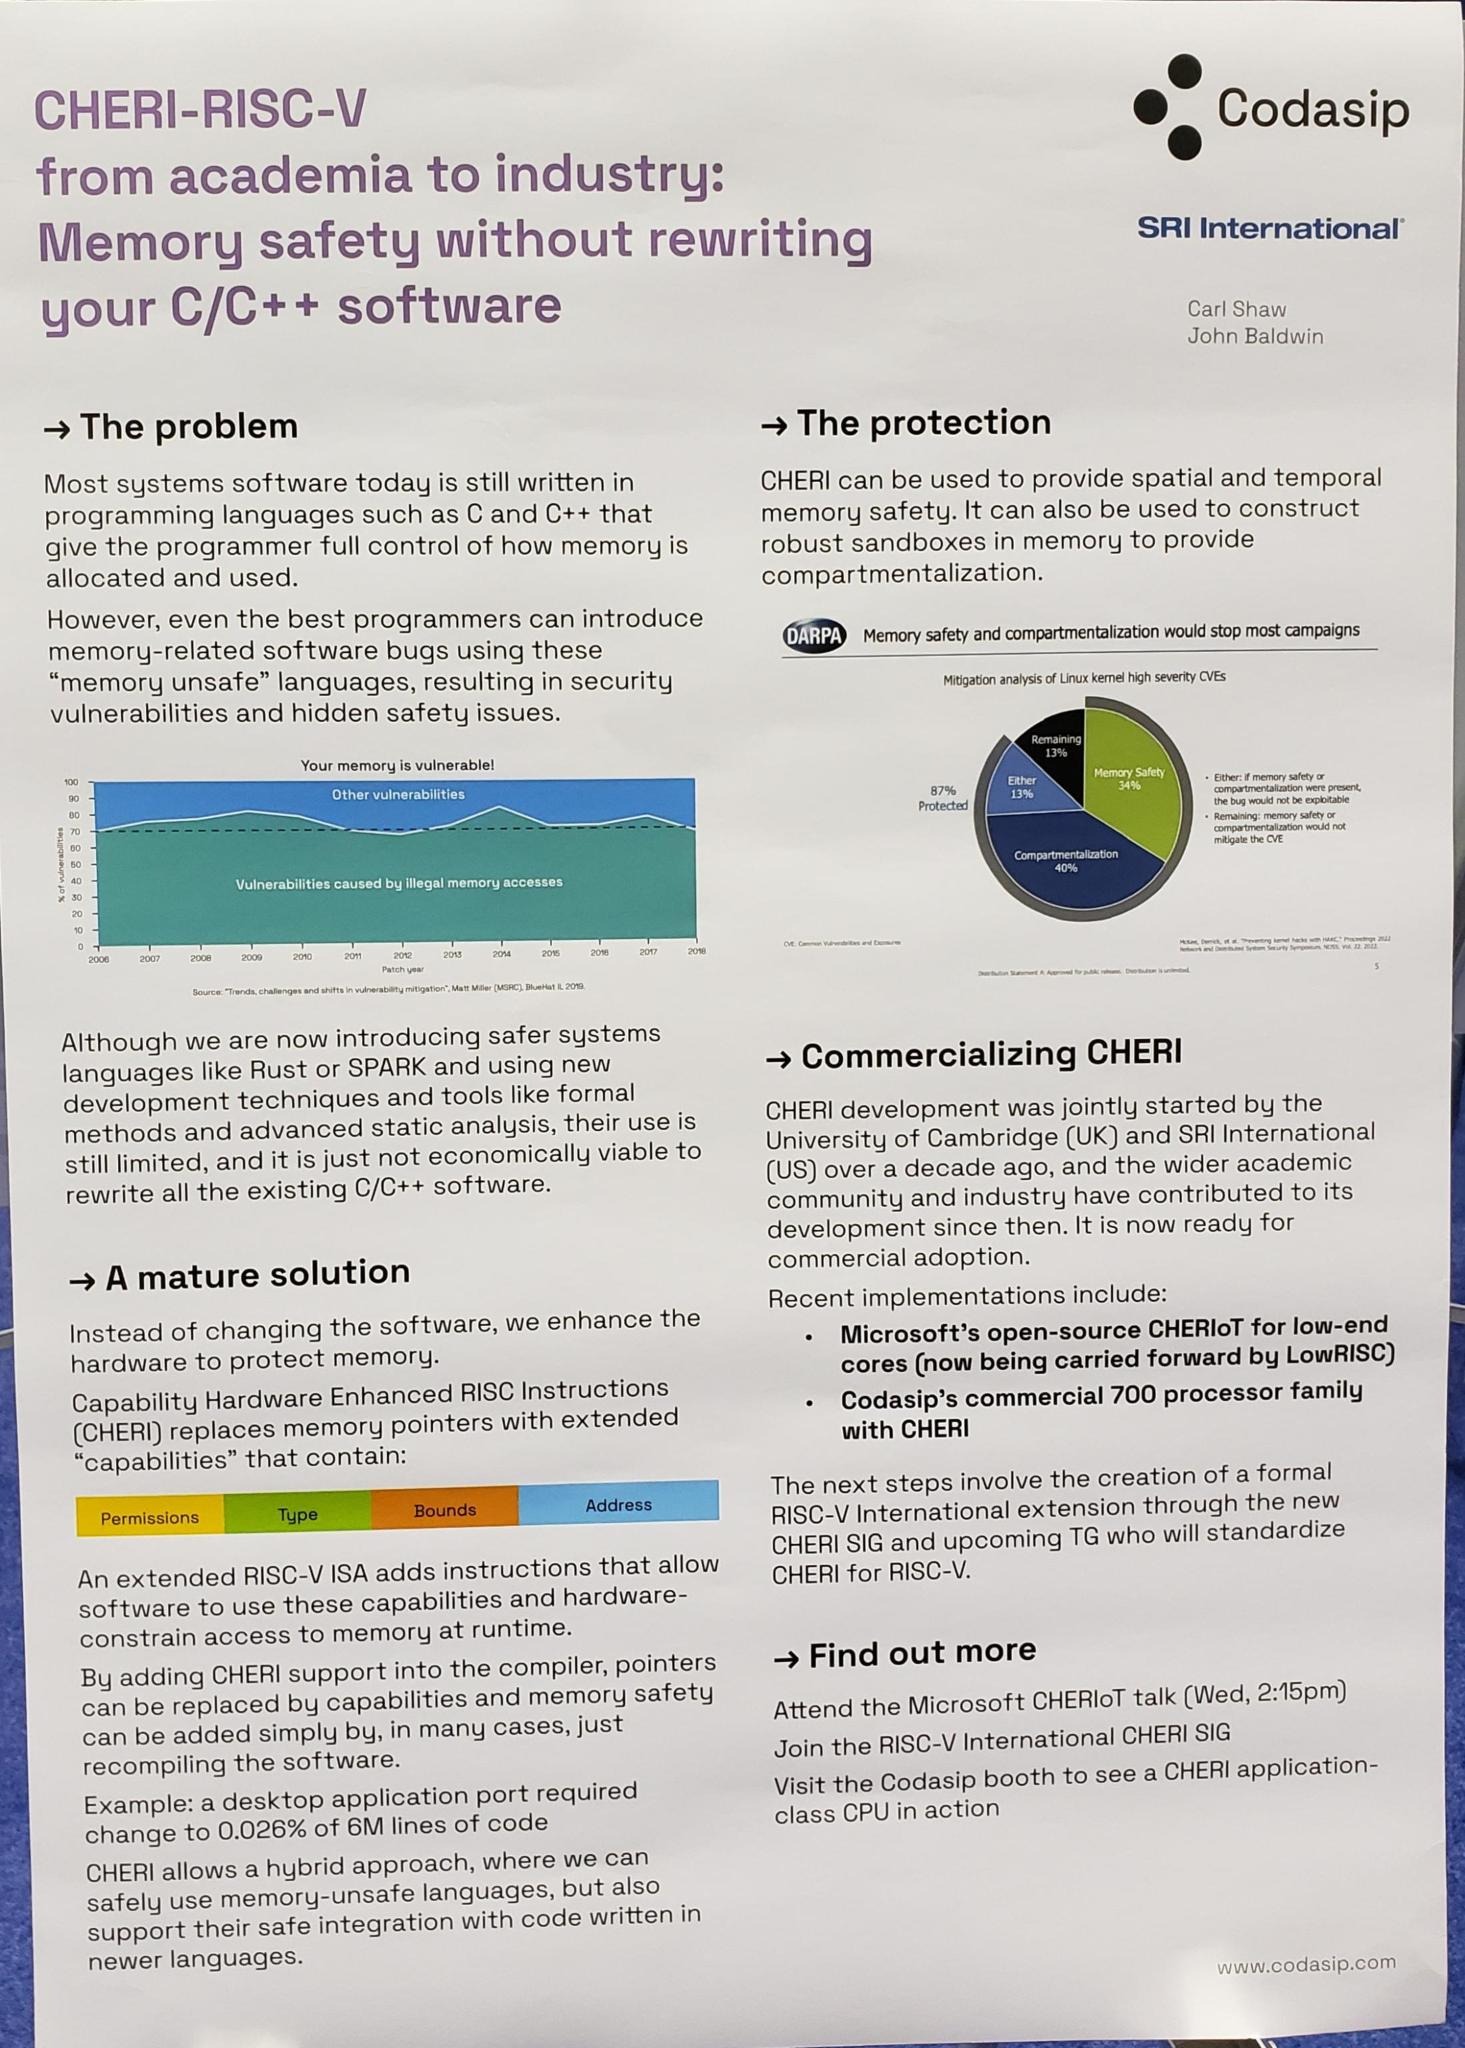 Codasip poster with a shout-out to CHERIoT!